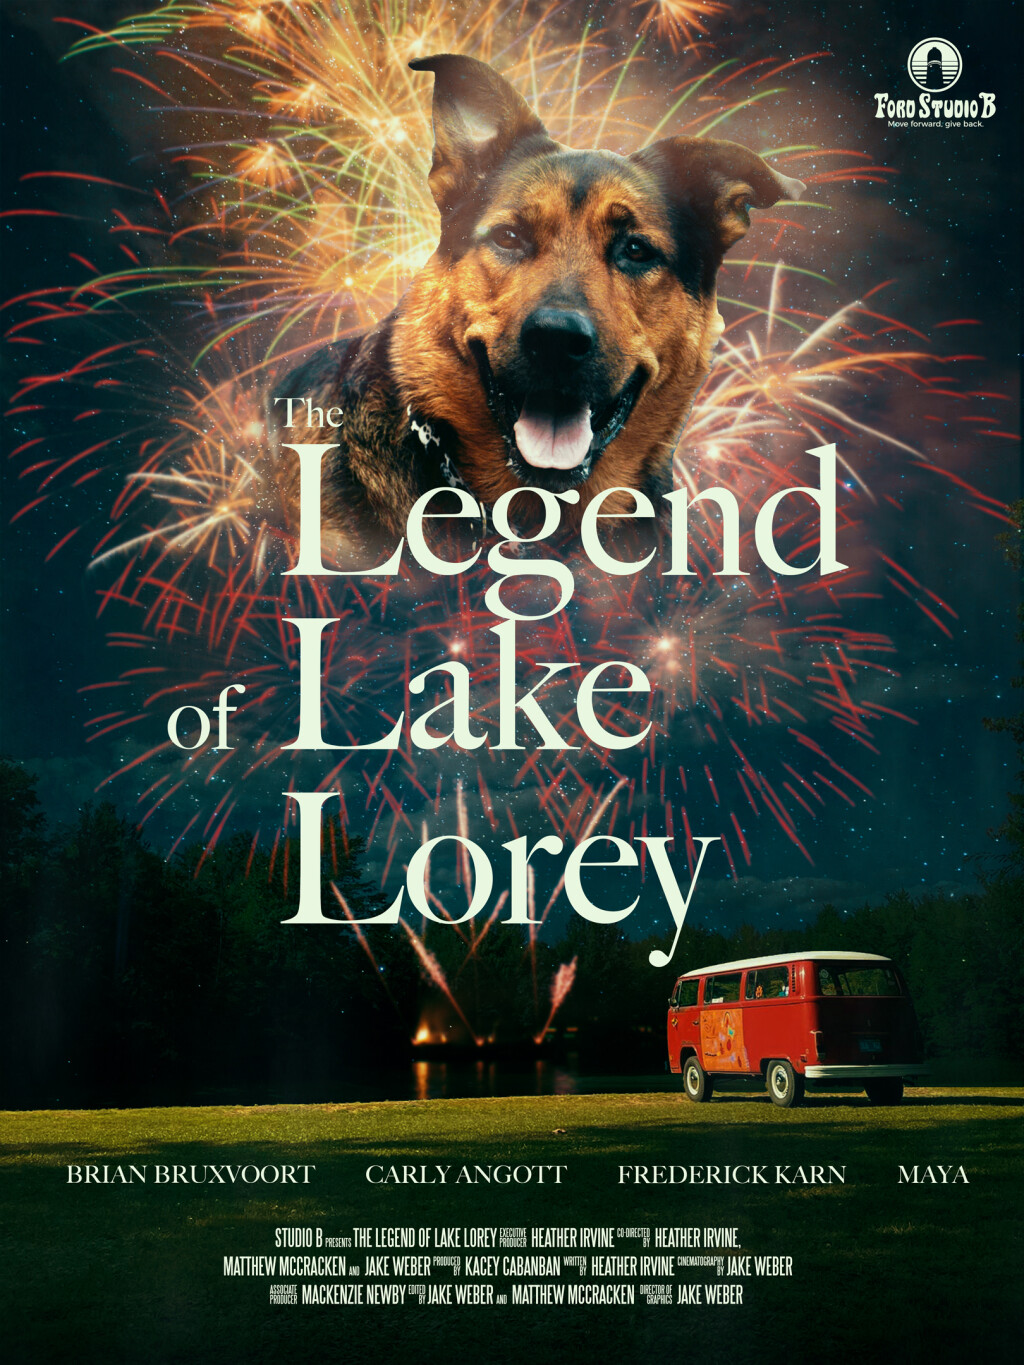 Filmposter for The Legend of Lake Lorey